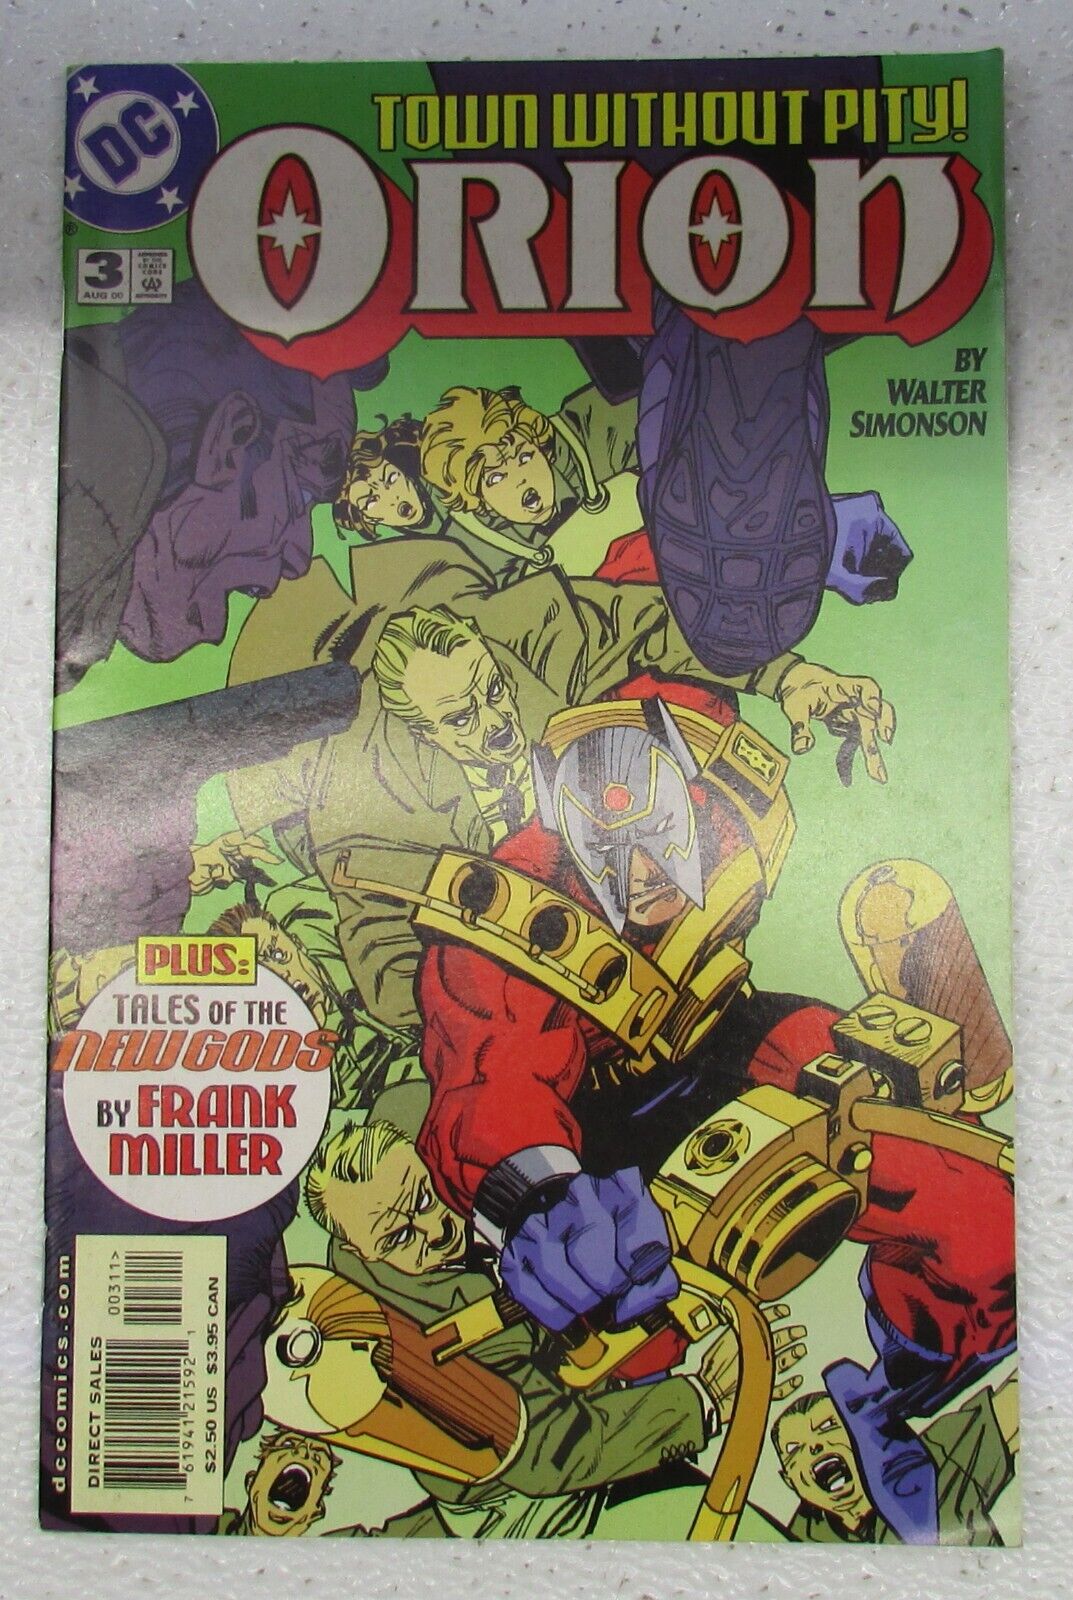 Vintage DC Comics August #3 Orion Town Without Pity Comic Book 2000